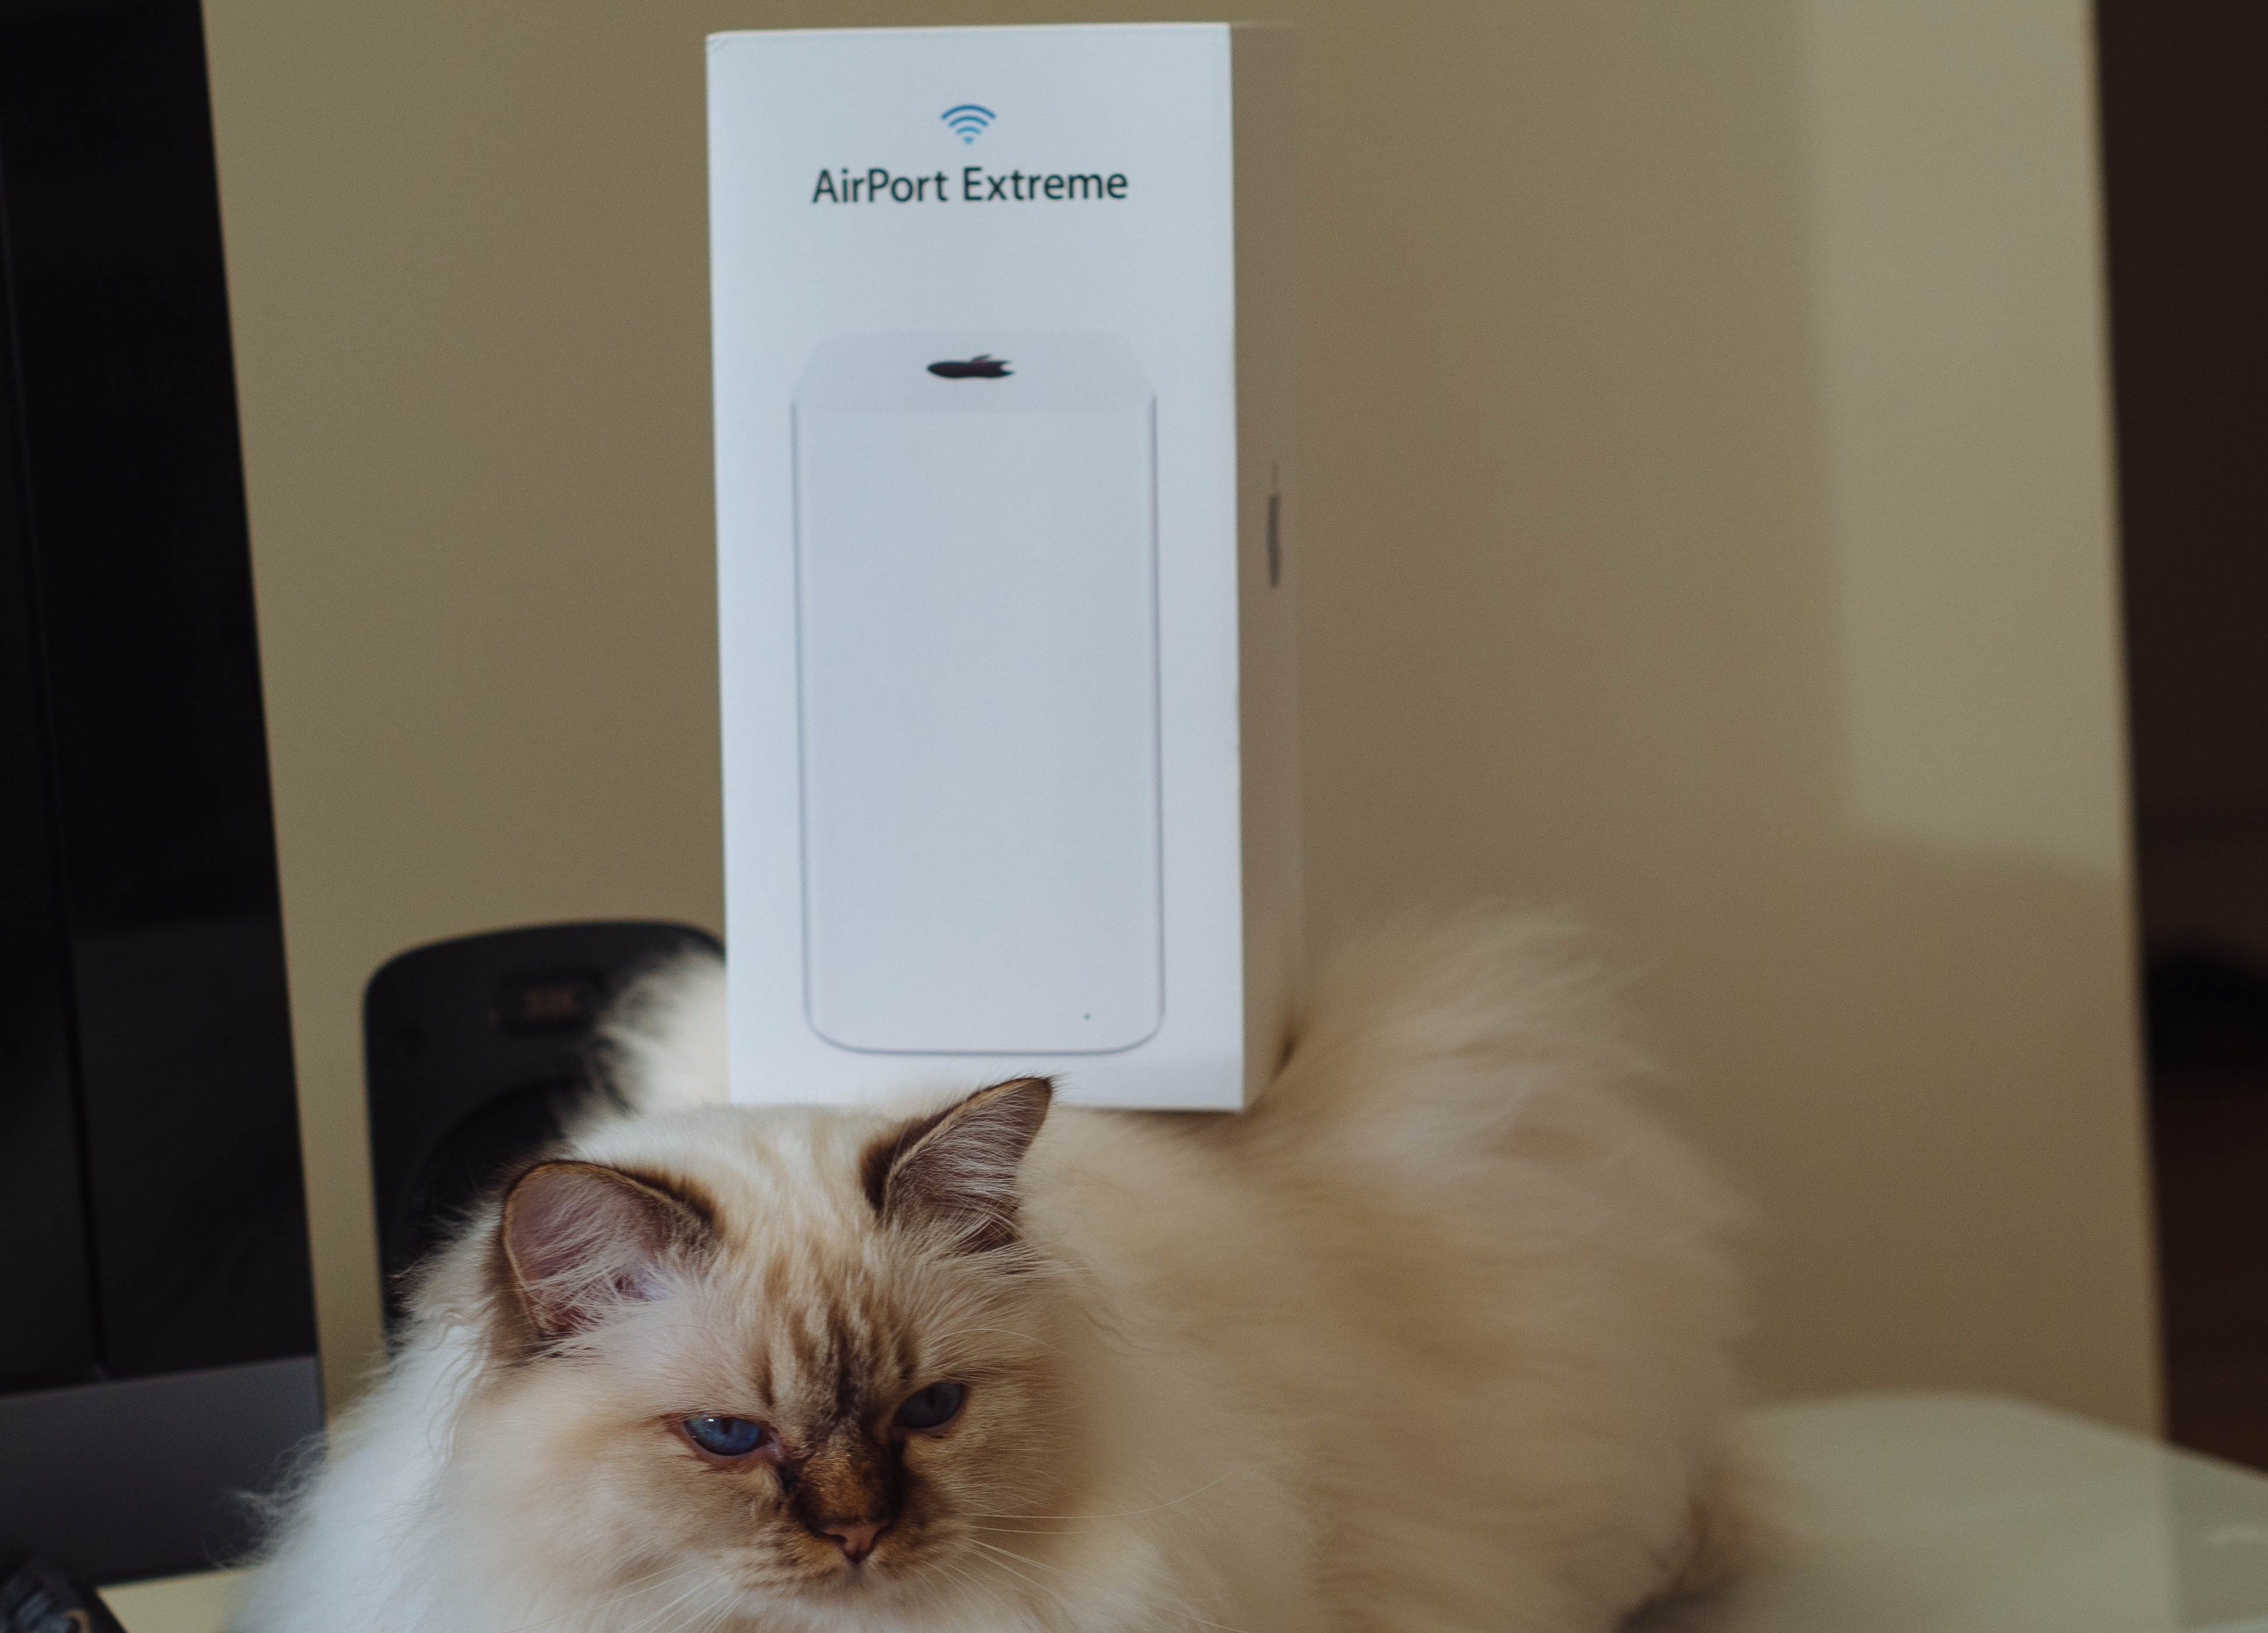 An AirPort Extreme tower model box sits on top of a cat, which sits on a table